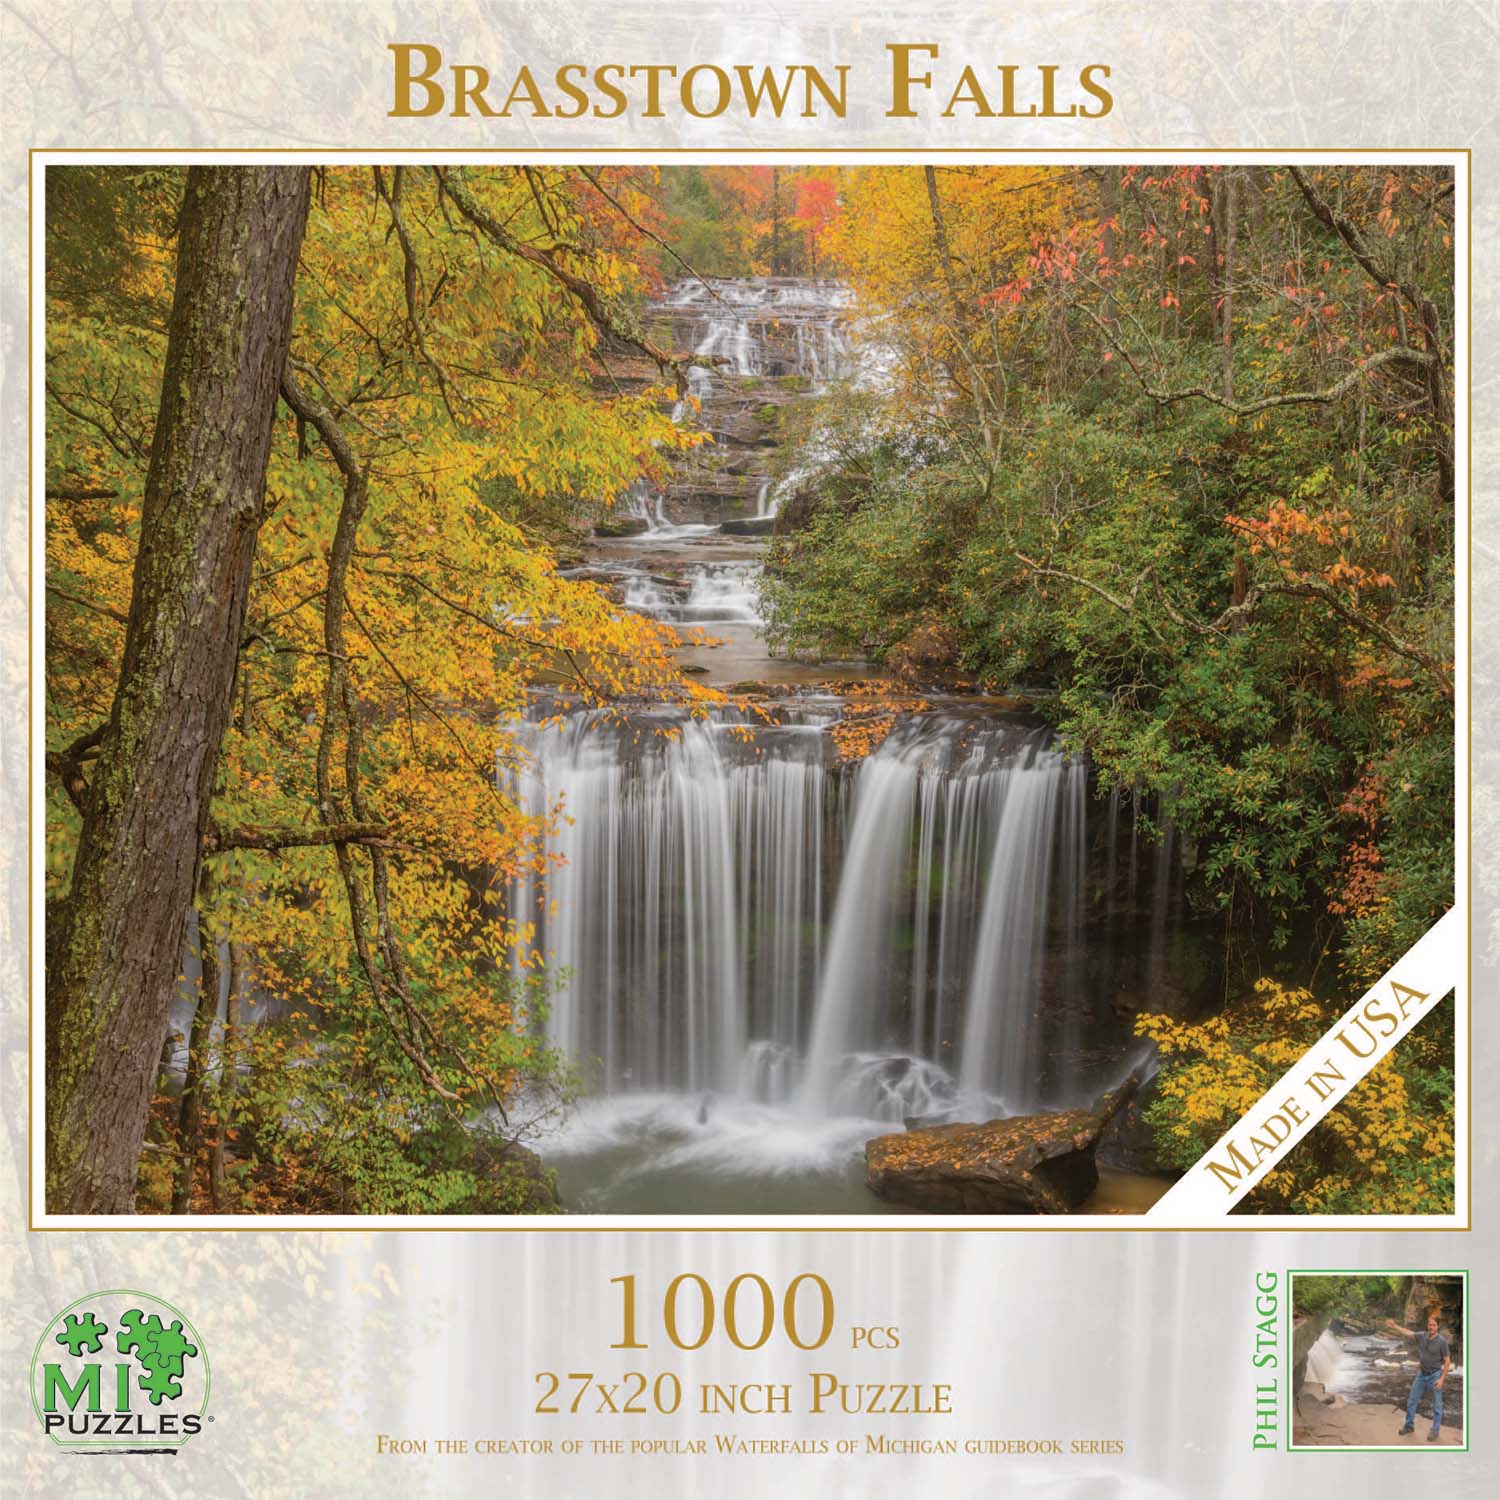 Brasstown Falls Photography Jigsaw Puzzle